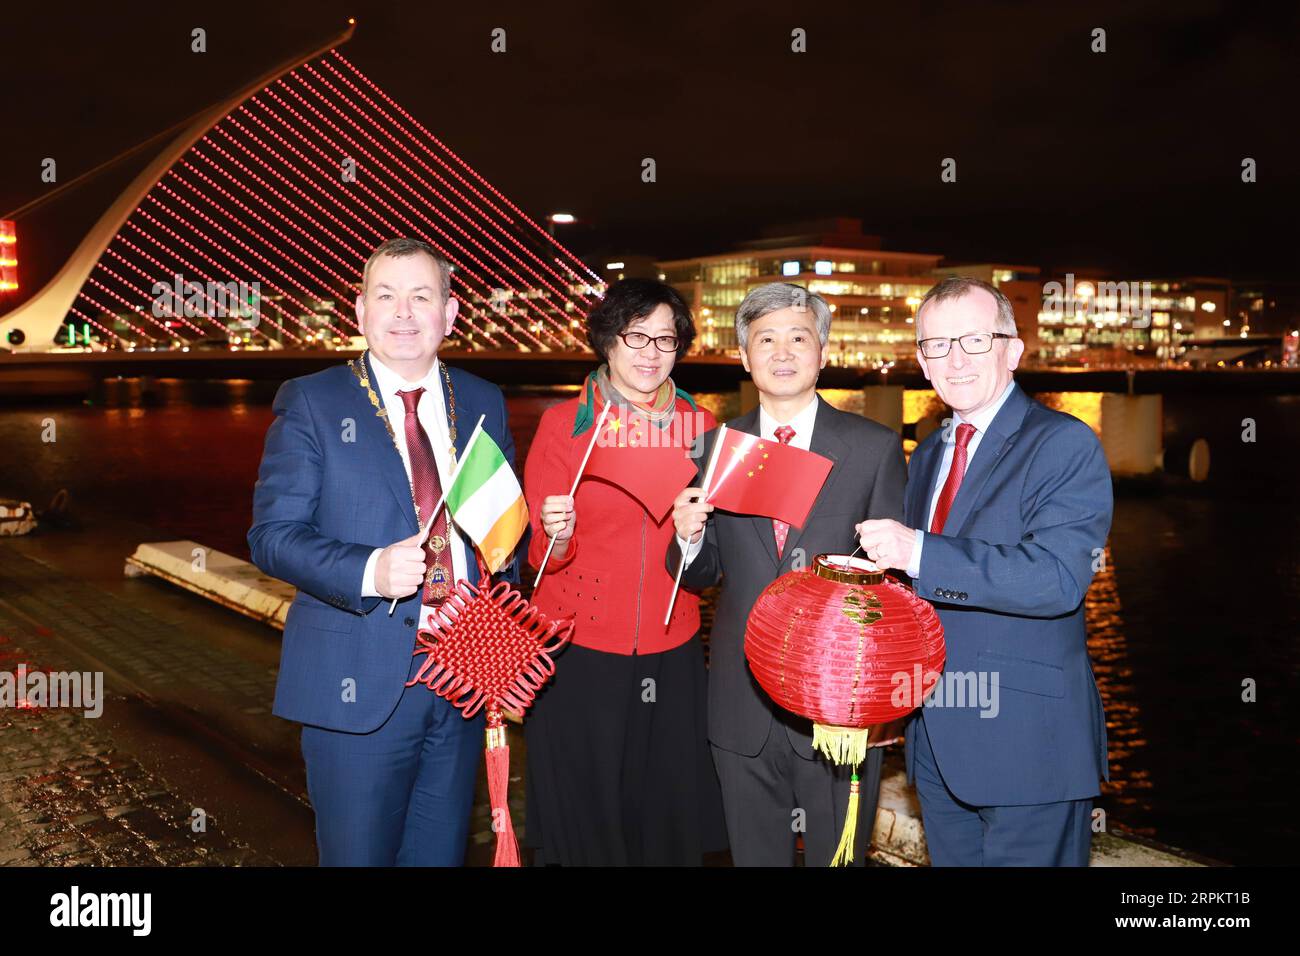 200117 -- DUBLIN, Jan. 17, 2020 -- Chinese Ambassador to Ireland He Xiangdong 2nd R and his wife Xia Lining 2nd L, Deputy Mayor of Dublin Tom Brabazon 1st L, and Tourism Ireland Chief Executive Niall Gibbons attend a ceremony to light up Dublin red for the coming Chinese New Year at the famous Samuel Beckett Bridge in Dublin, Ireland, Jan. 16, 2020. A launch ceremony to light up Dublin red for the coming Chinese New Year was held here on Thursday evening. Light up with Chinese Red is an initiative first put forward by Dublin City Council five years ago and later copied by many other cities and Stock Photo